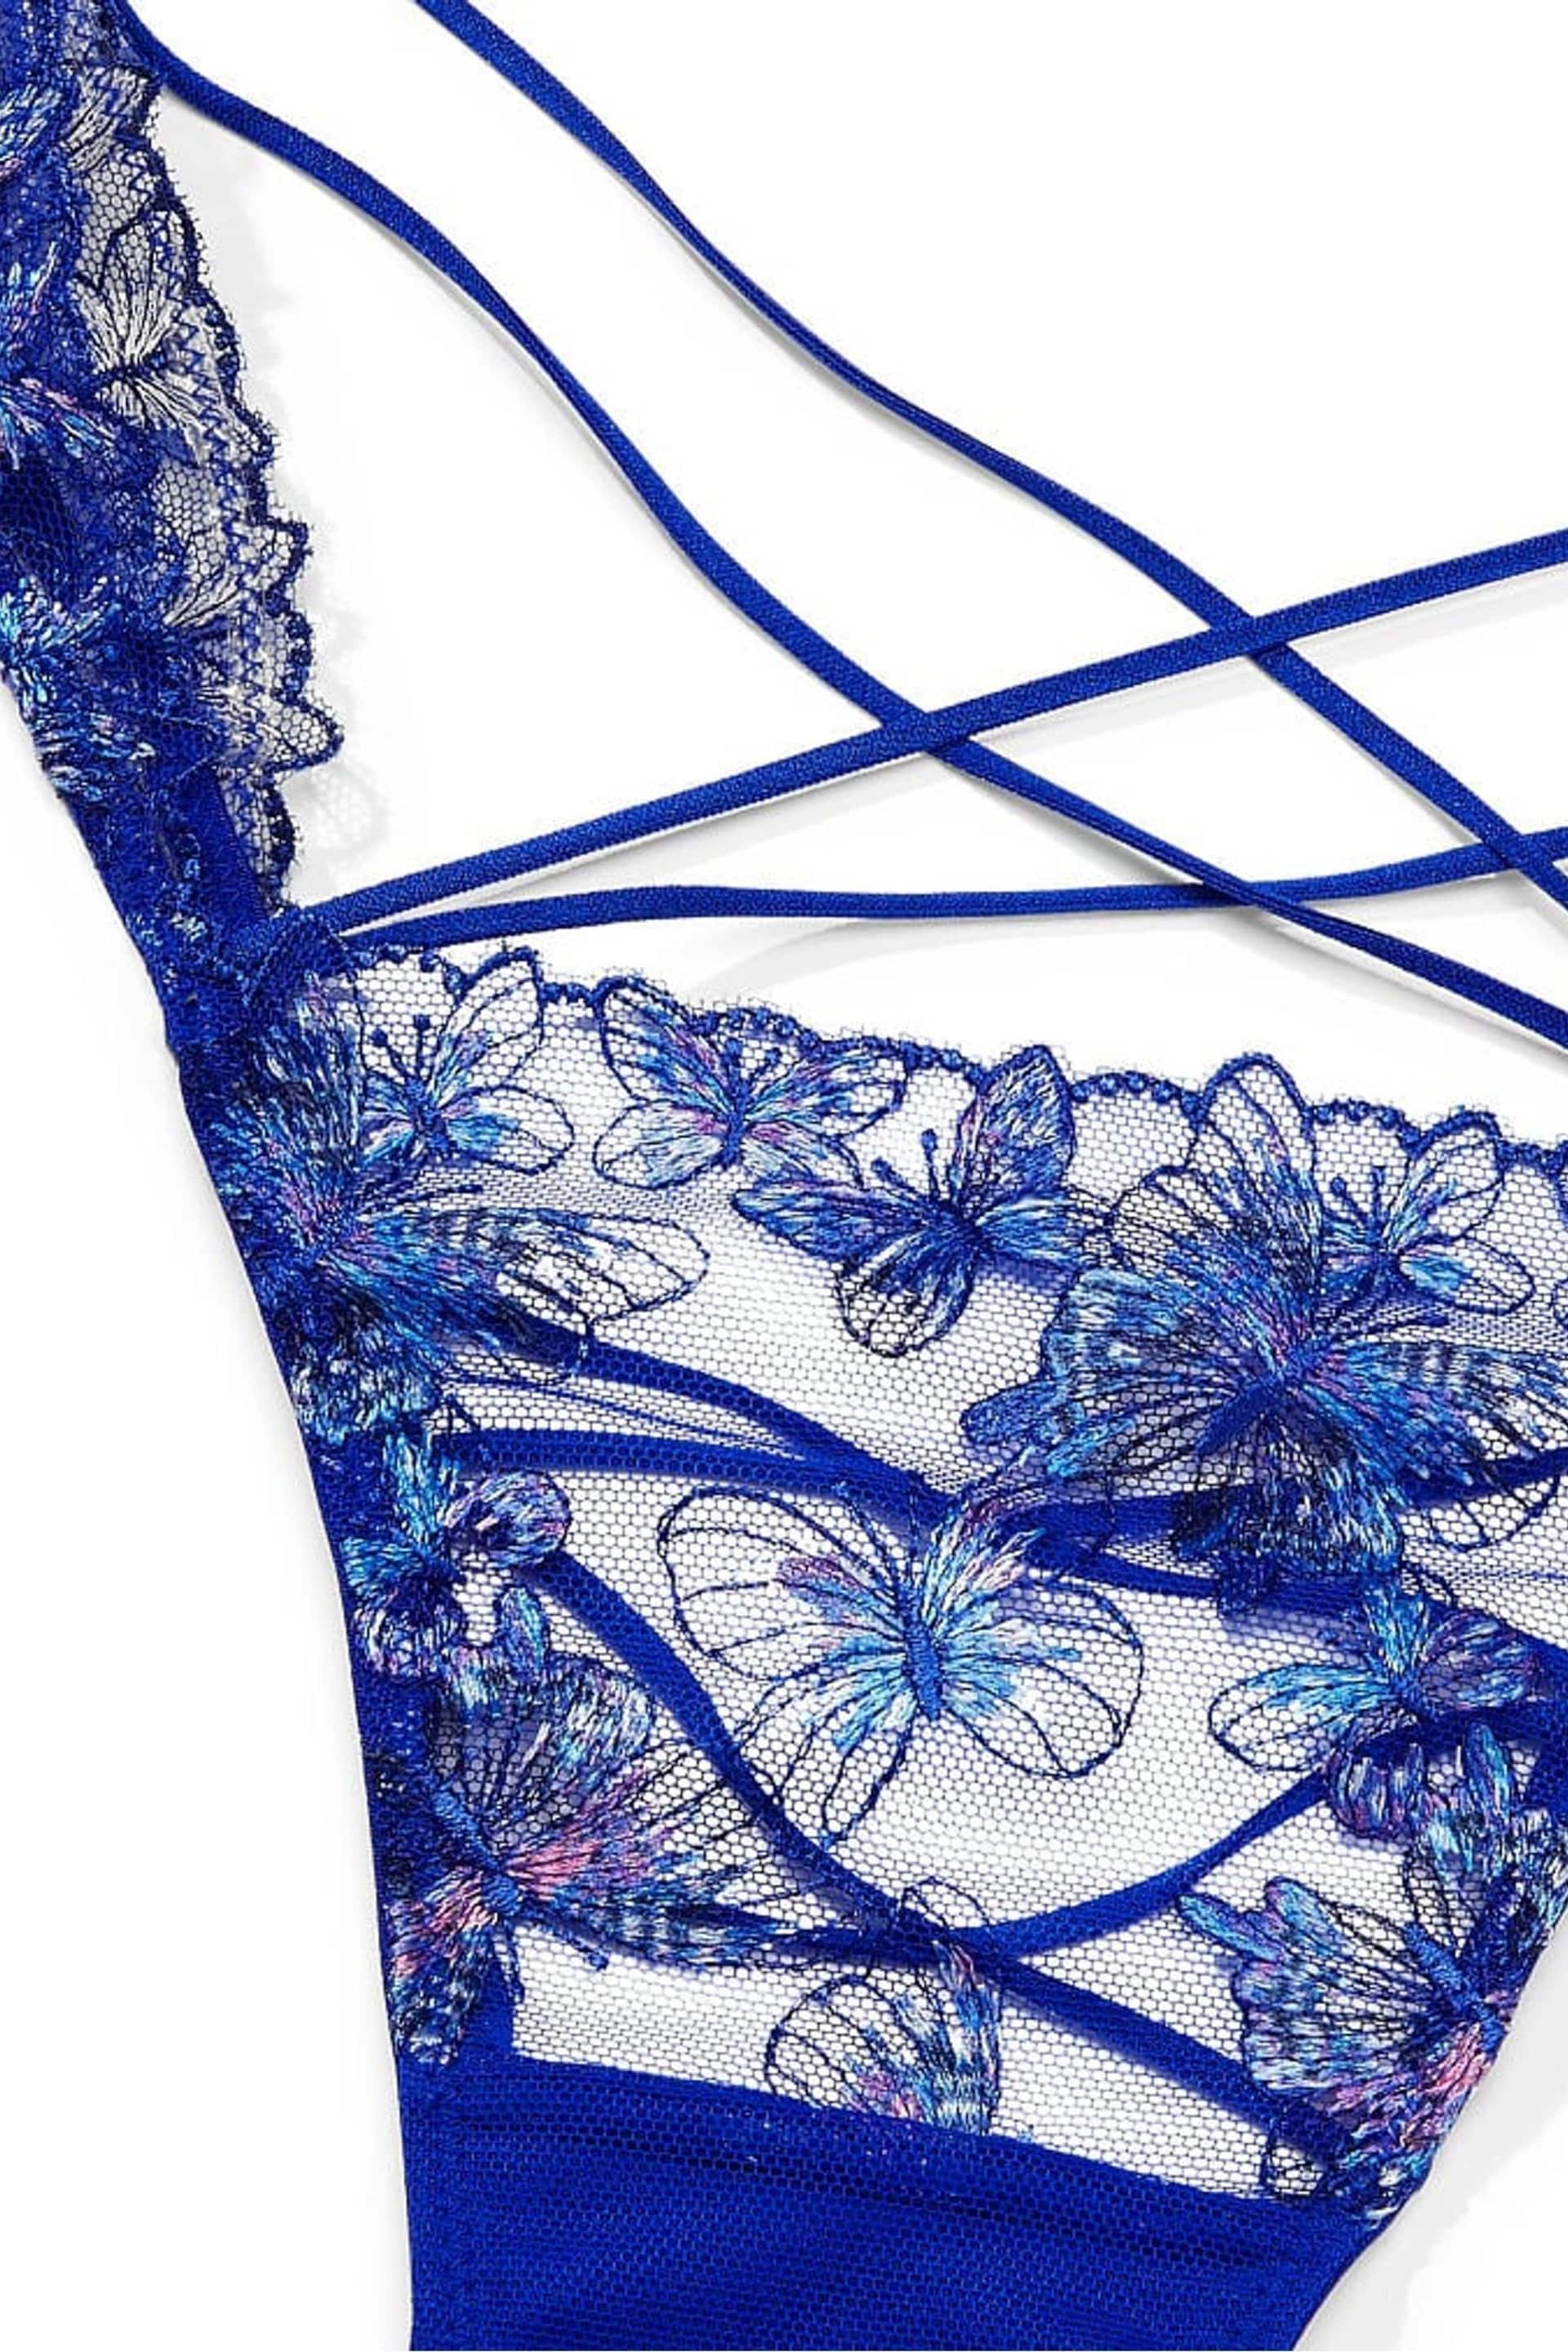 Victoria's Secret Blue Butterfly Embroidery Brazilian Embroidered Knickers - Image 5 of 5